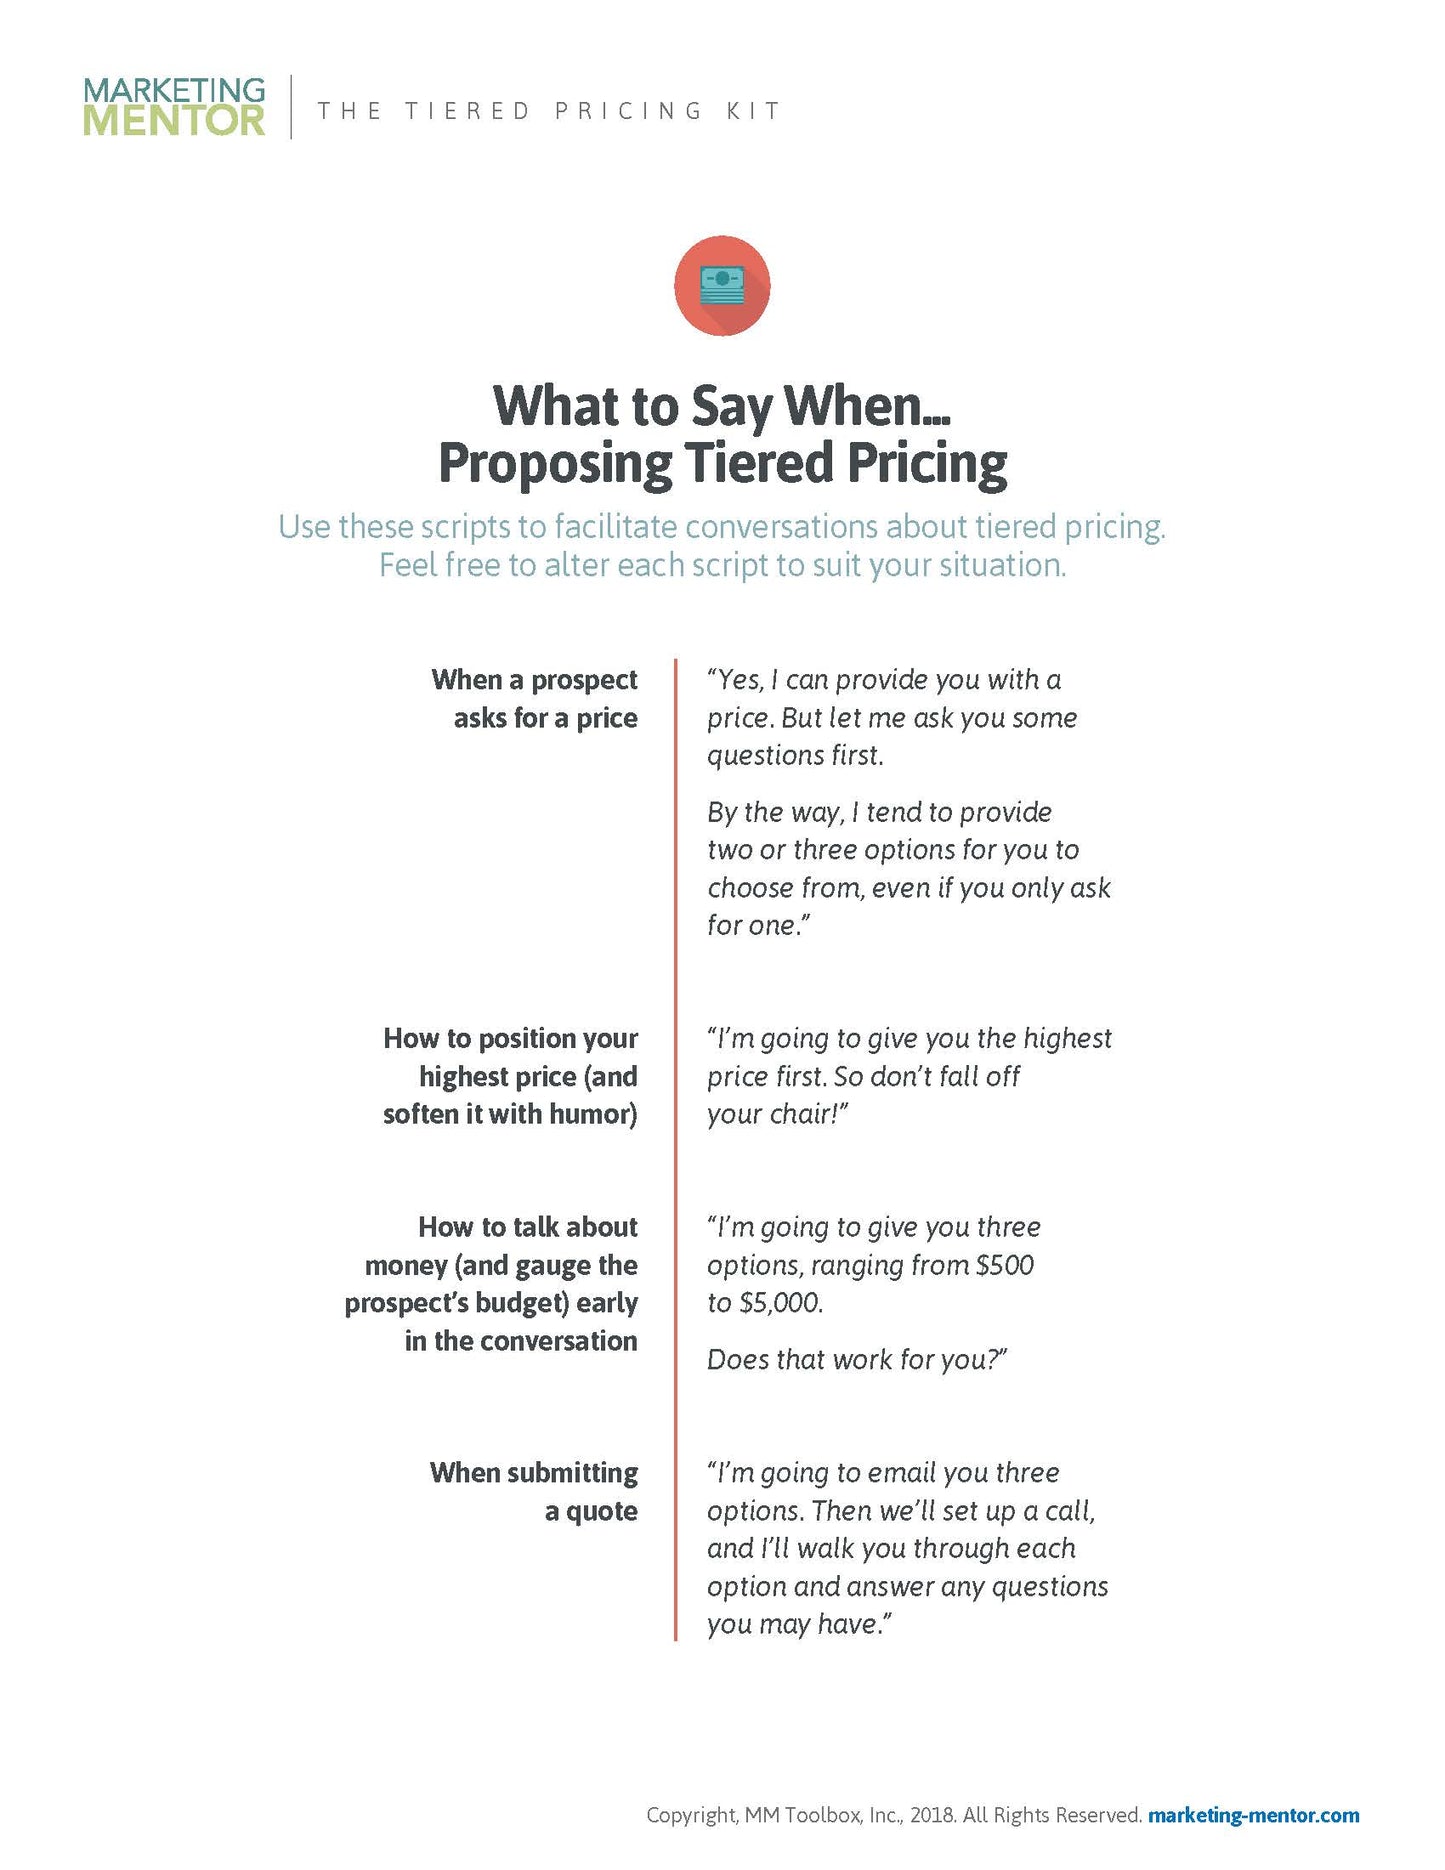 The Tiered Pricing Kit: How to Earn More on Every Project